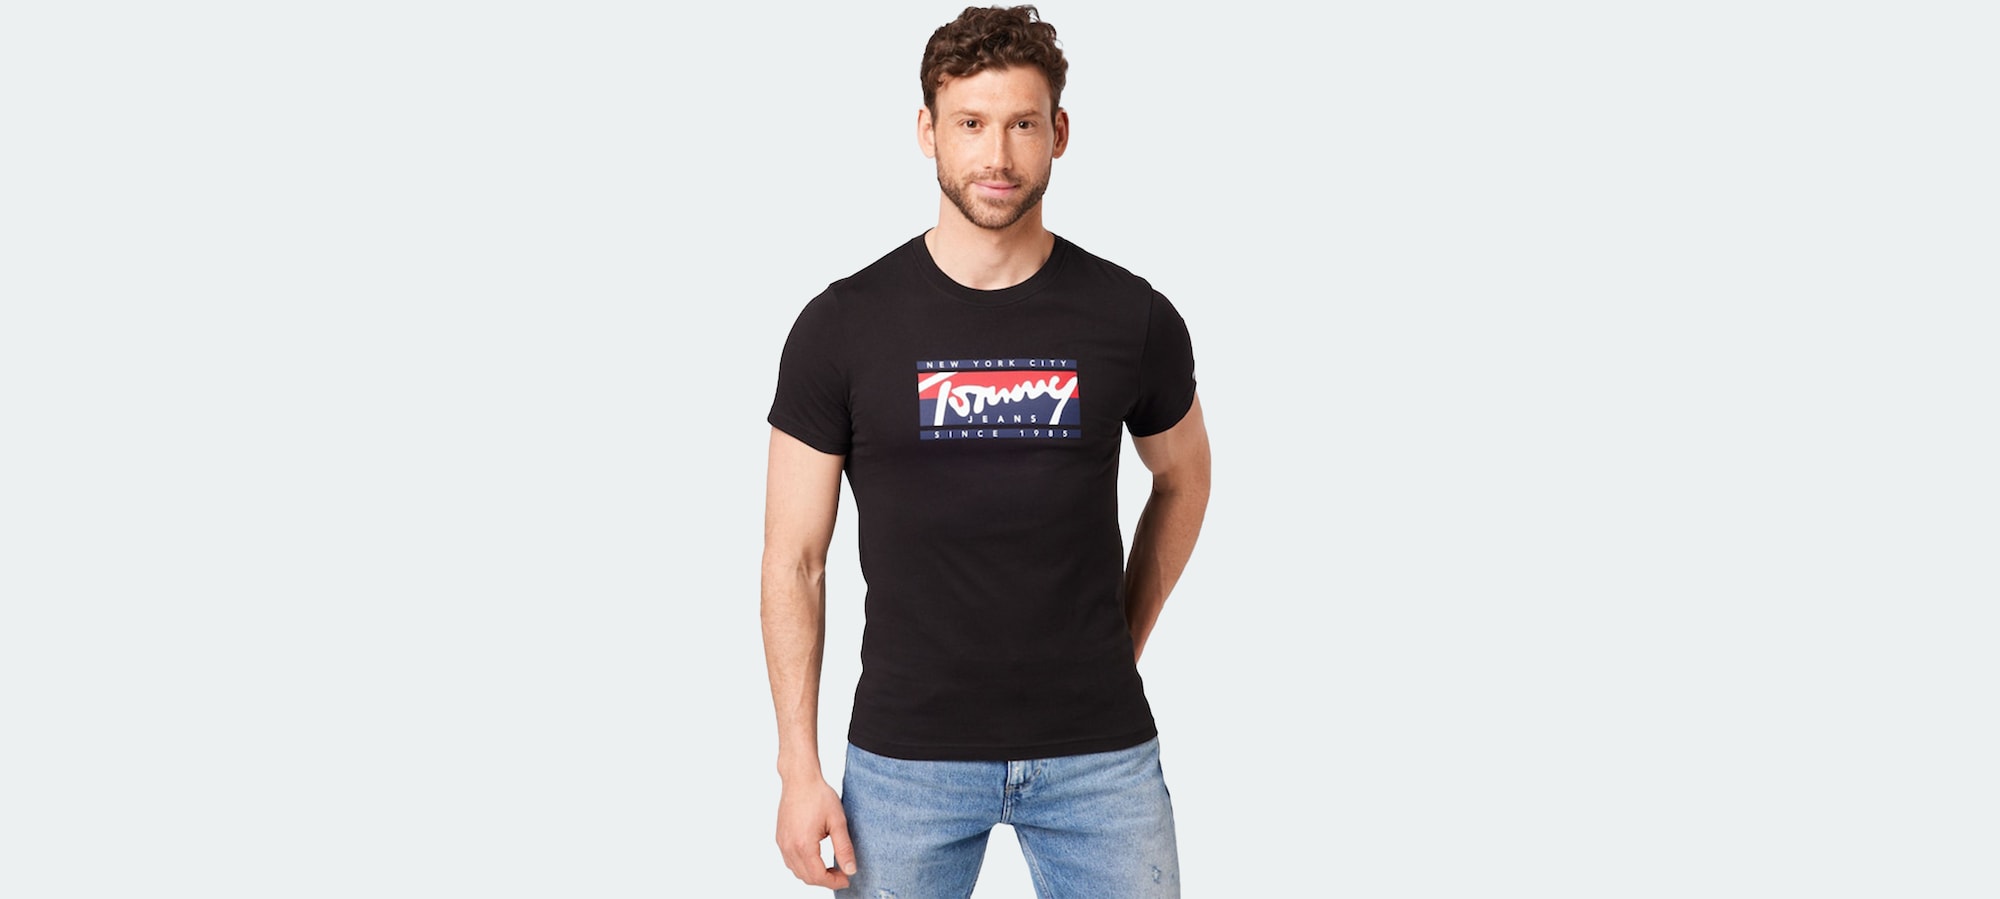 Save now! T-shirts